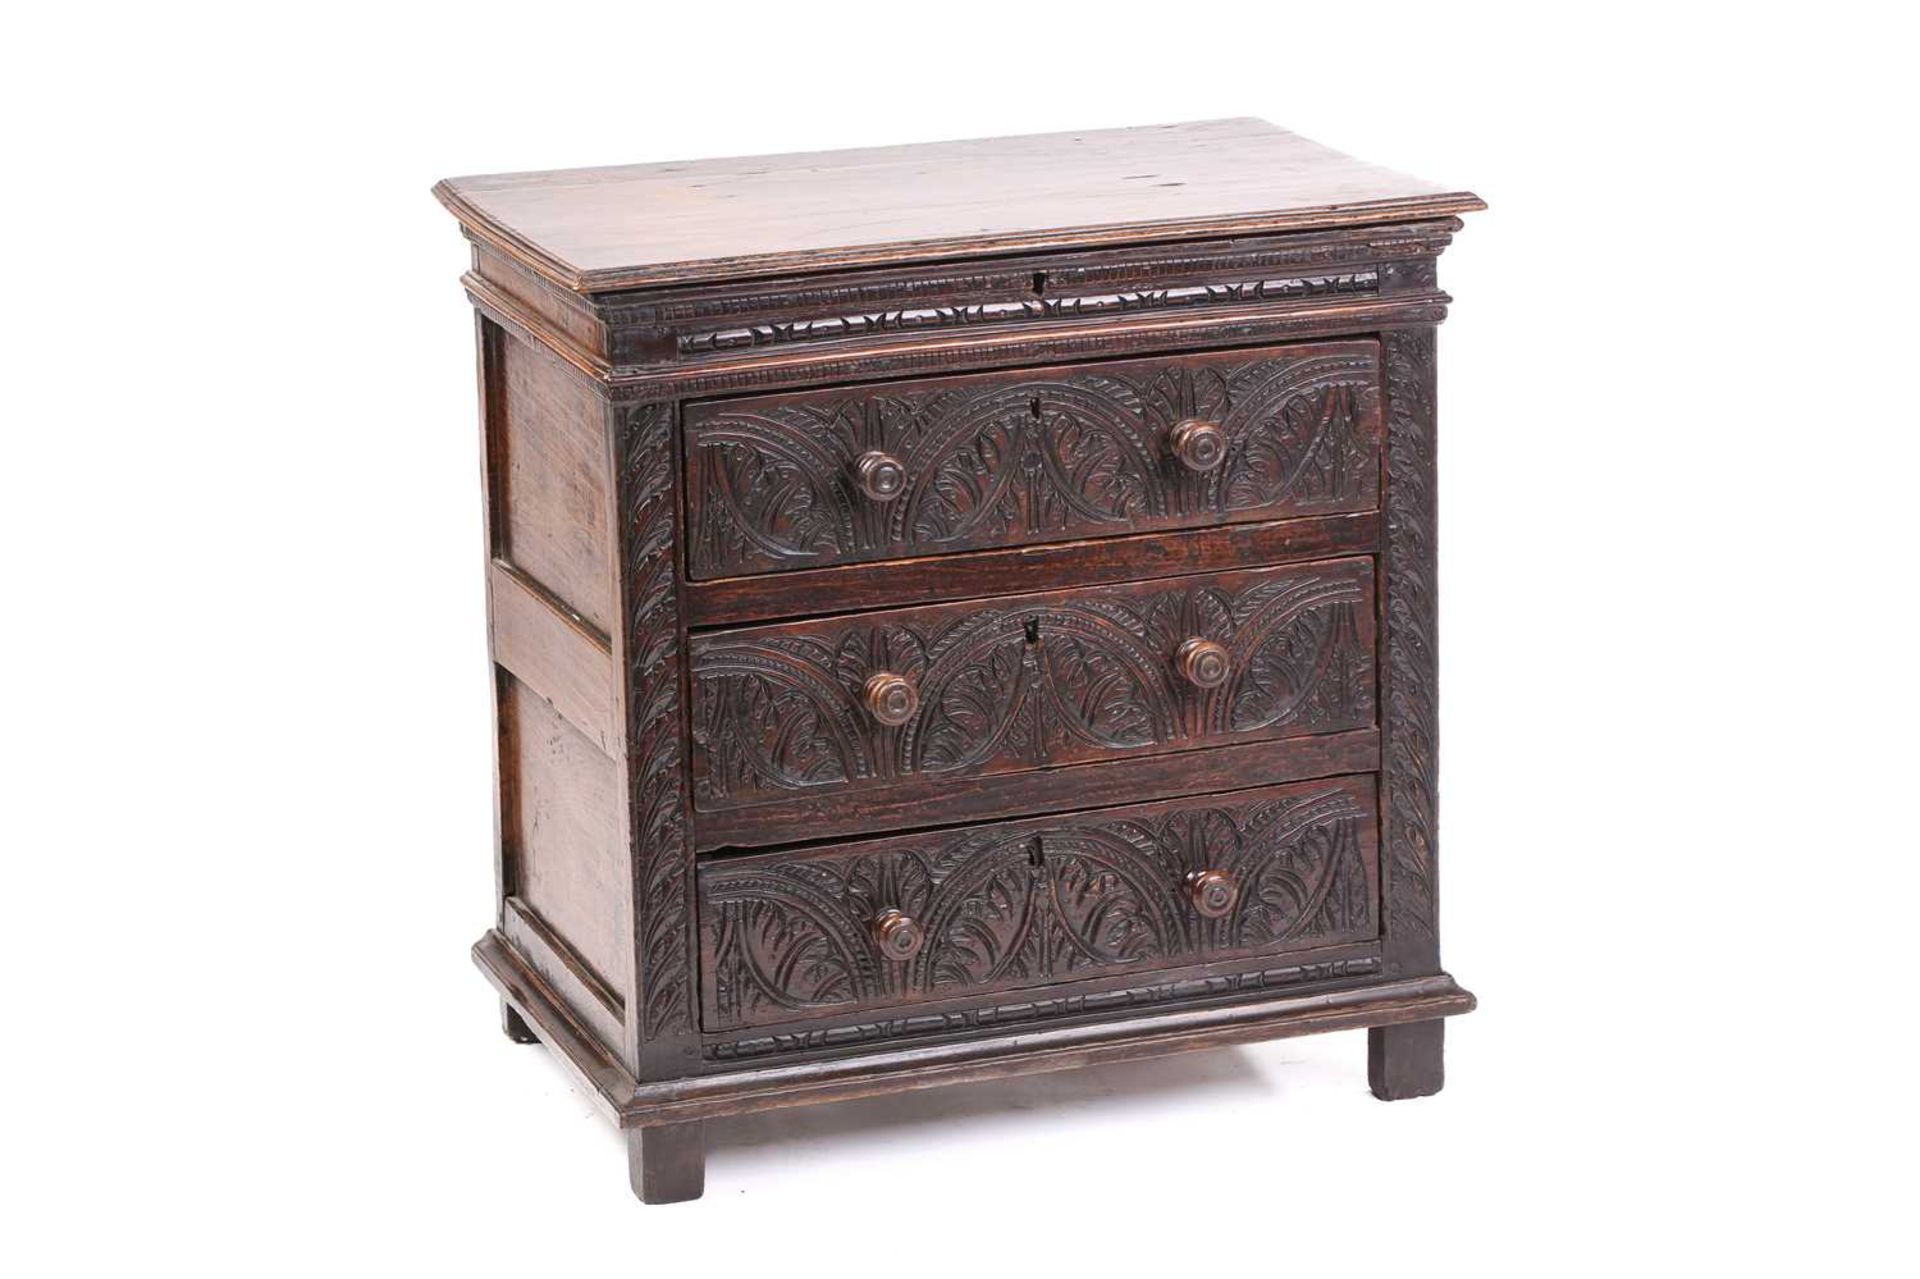 A carved oak 17th-century style three-drawer chest (17th century period timber and later, re- - Image 4 of 9